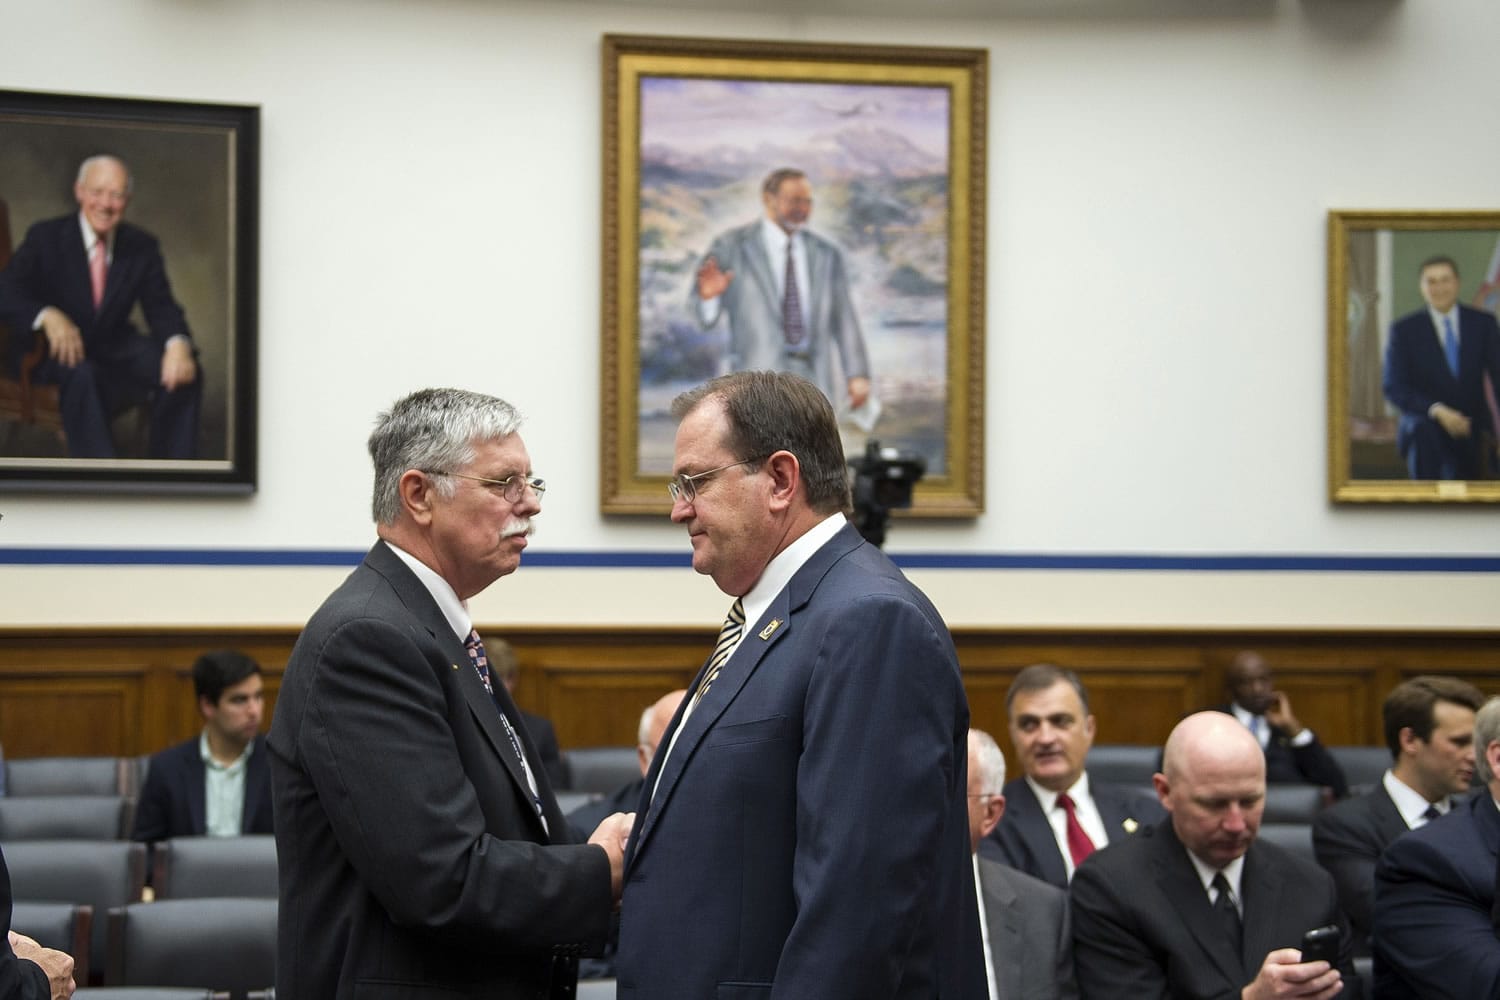 Amtrak President and CEO Joseph Boardman, left, talks with Dennis Pierce, national president, Brotherhood of Locomotive Engineers and Trainmen, on Capitol Hill in Washington, prior to testifying Tuesday before the House Transportation and Infrastructure Committee oversight hearing of the Amtrak train derailment in Philadelphia.